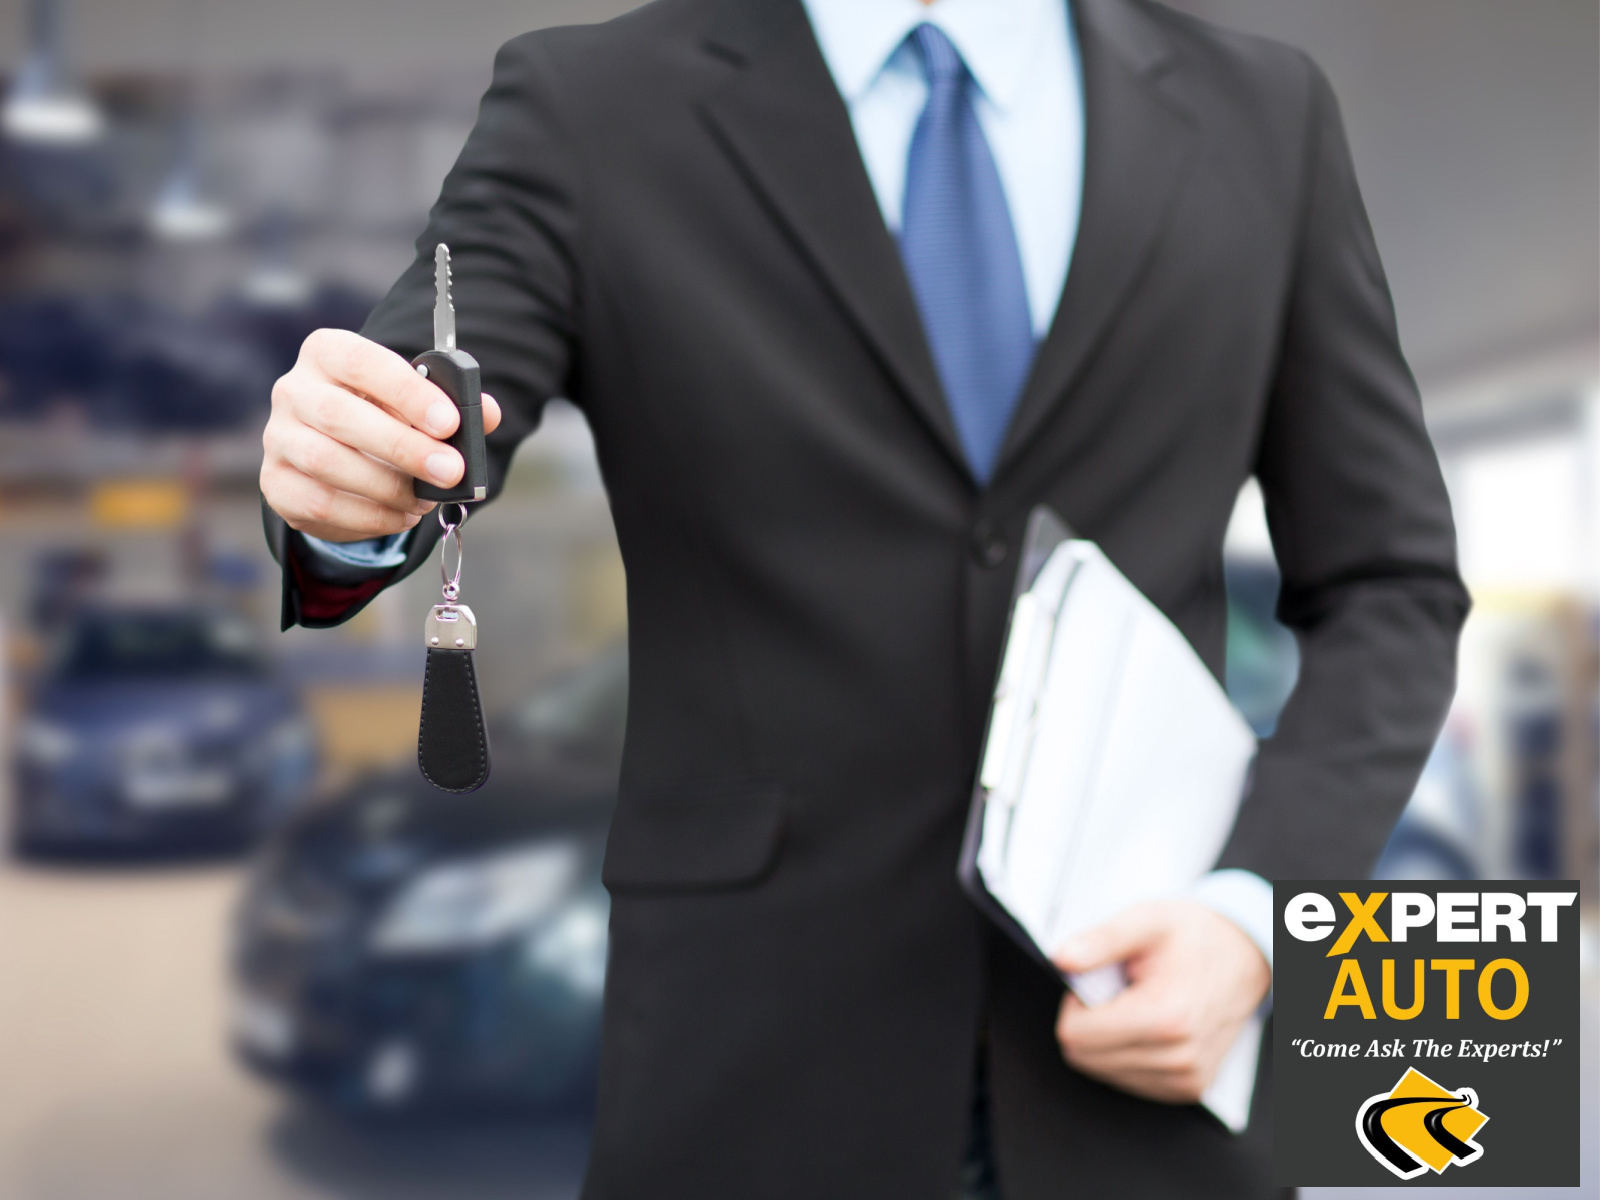 What to Expect from a Trusted Used Car Dealership